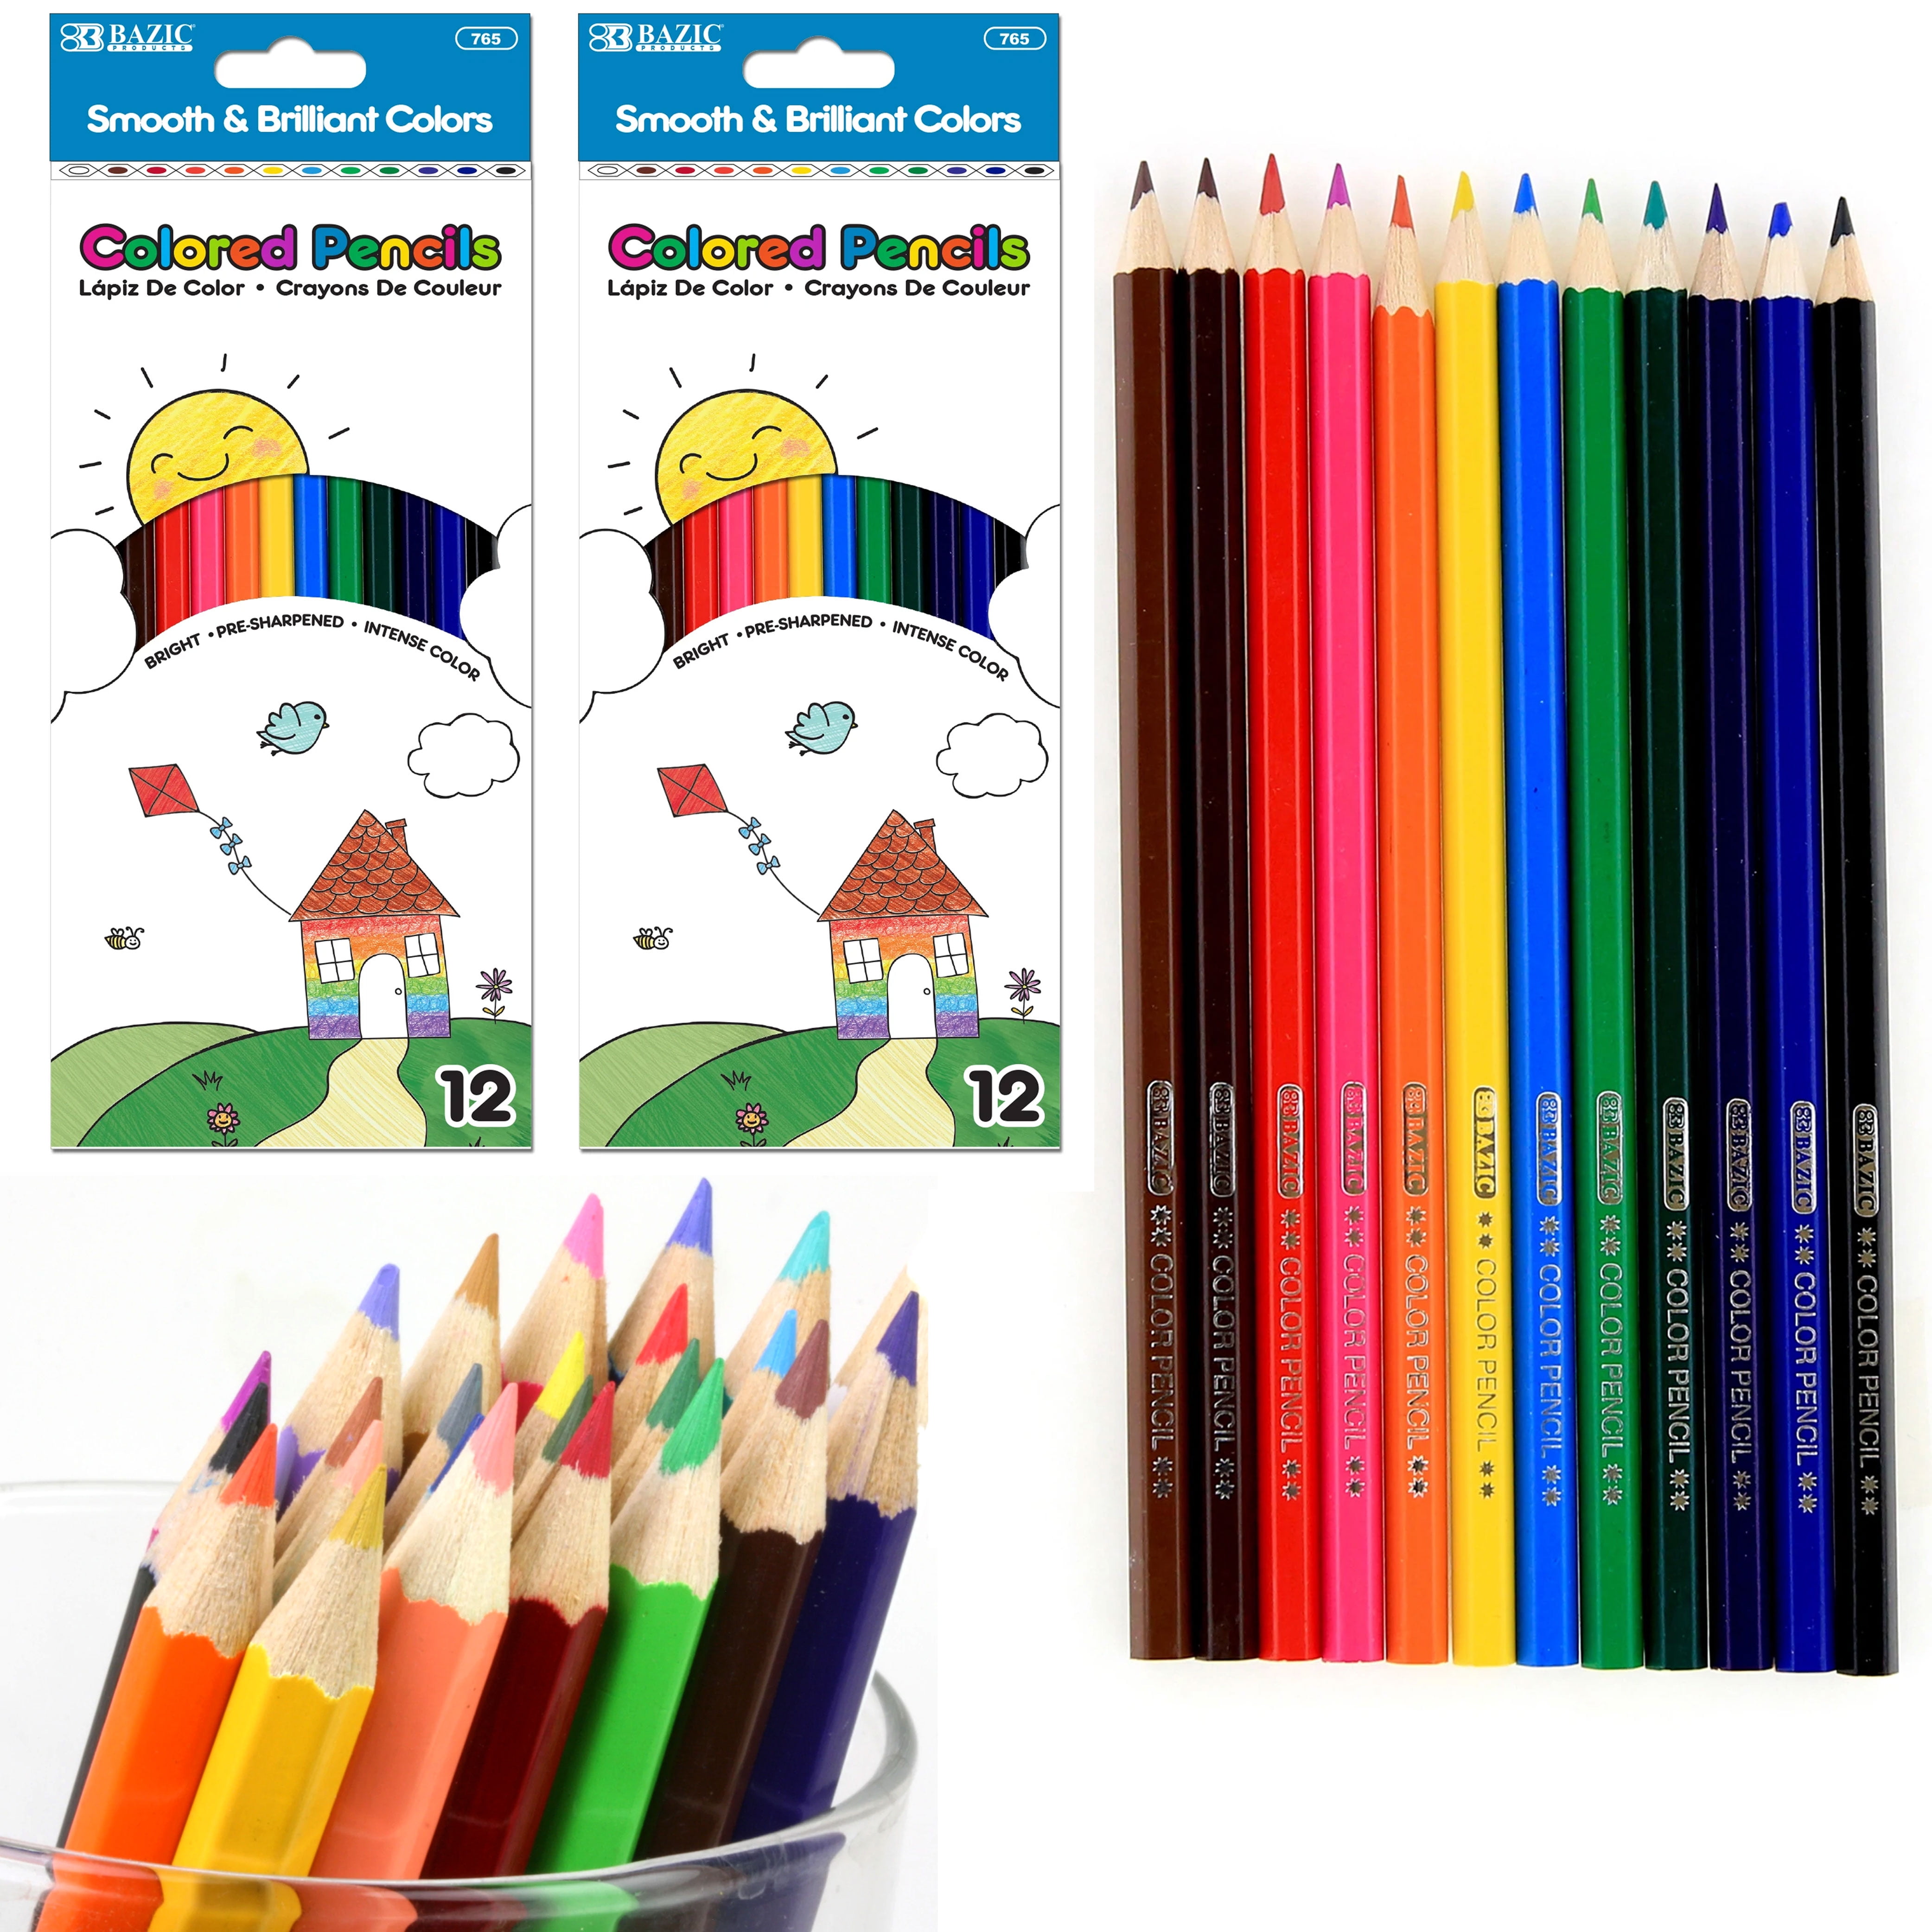  PerKoop 24 Pack Colored Pencils Bulk for Operation Christmas,  Pre Sharpened Colored Pencils for Kids, 24 Assorted Colors Coloring Pencils  576 Count for School Classroom Office : Office Products